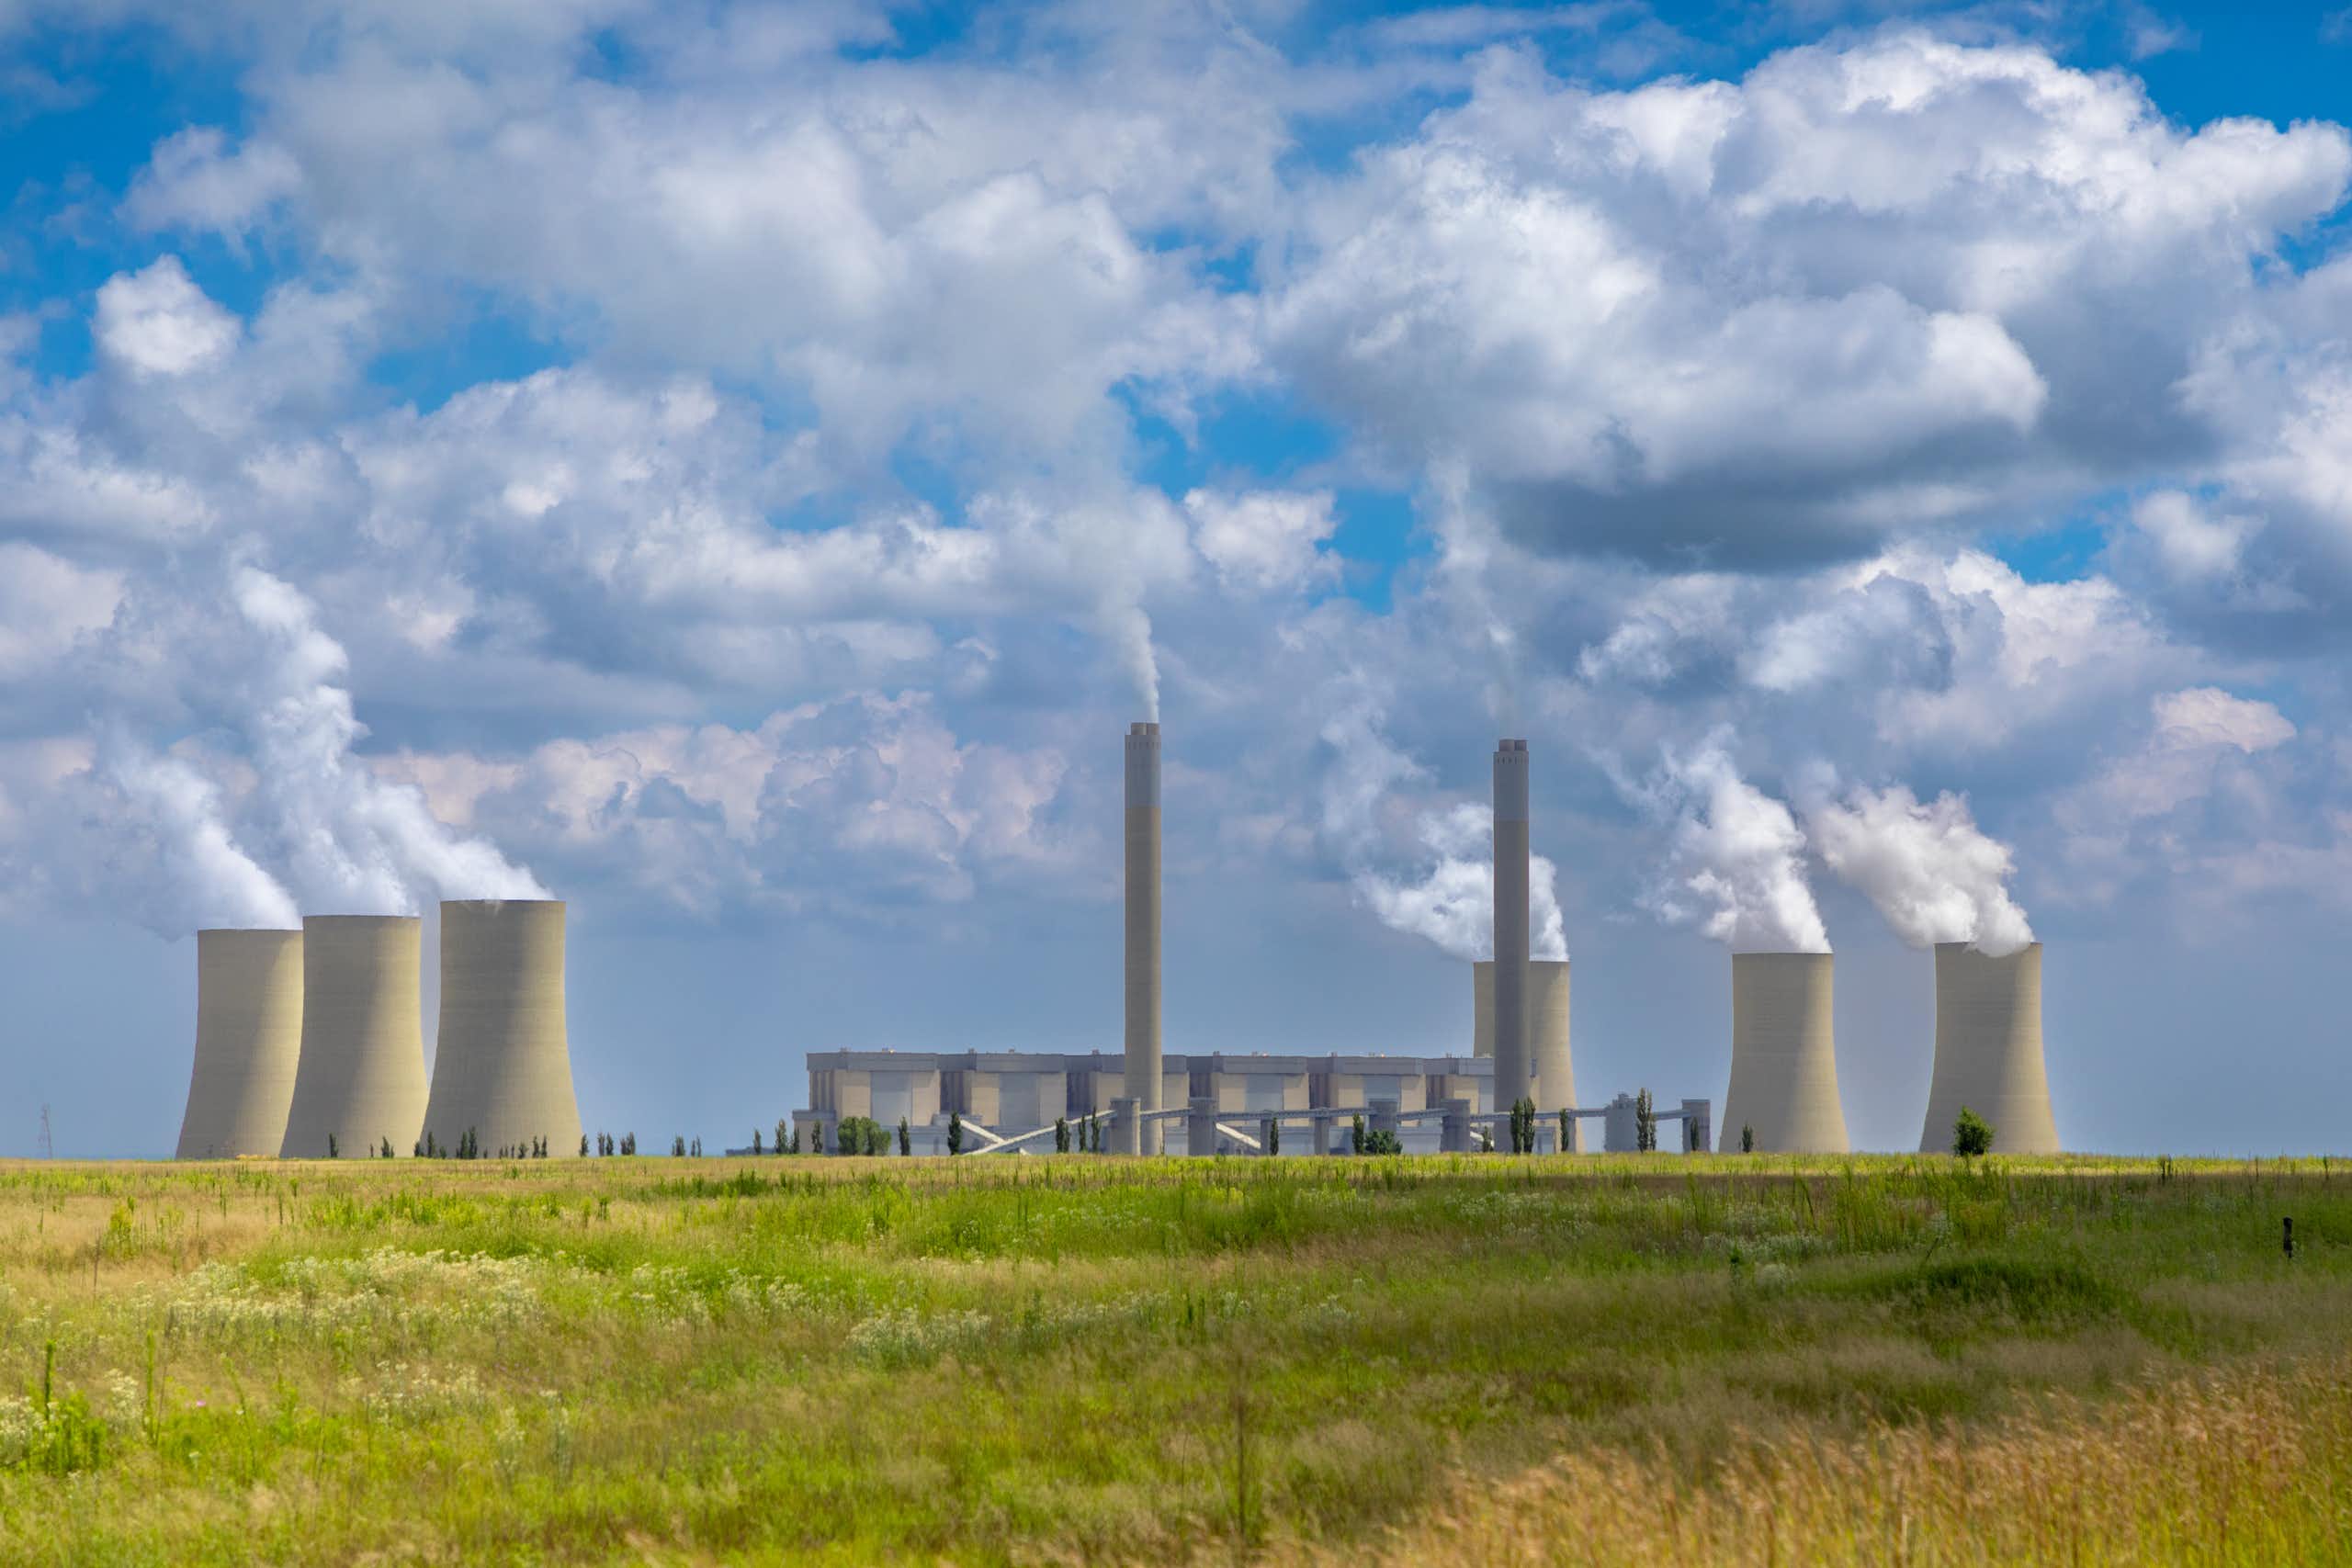 Distant view of concrete towers in a landscape, with vapour rising from them